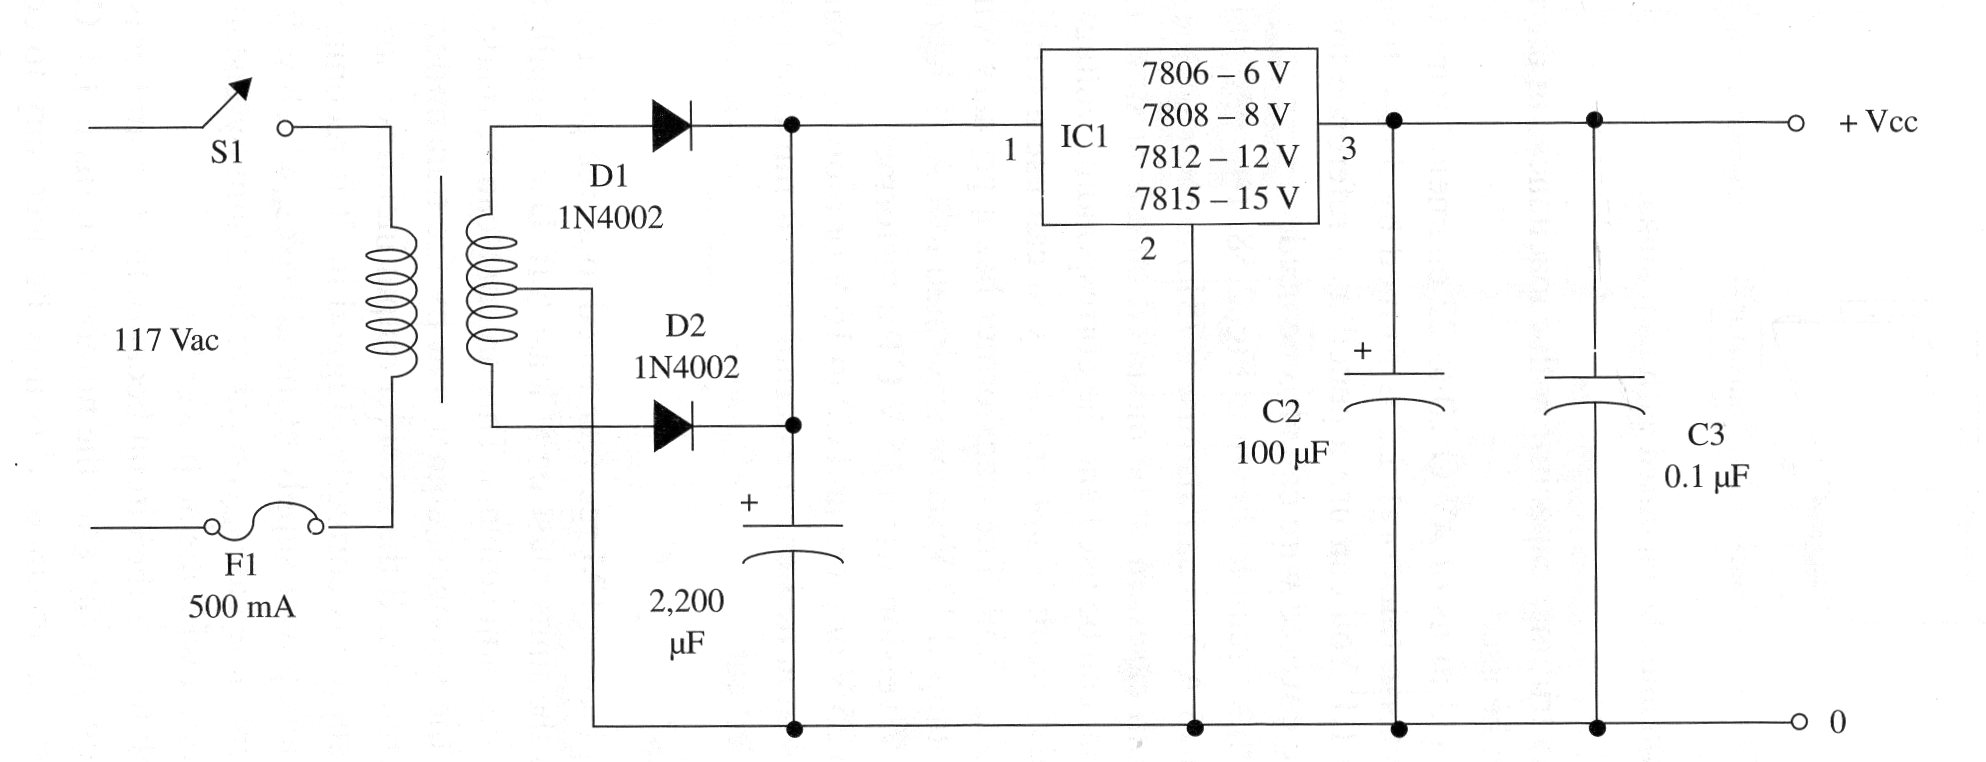 Figure 8 – power supply for the transmitter